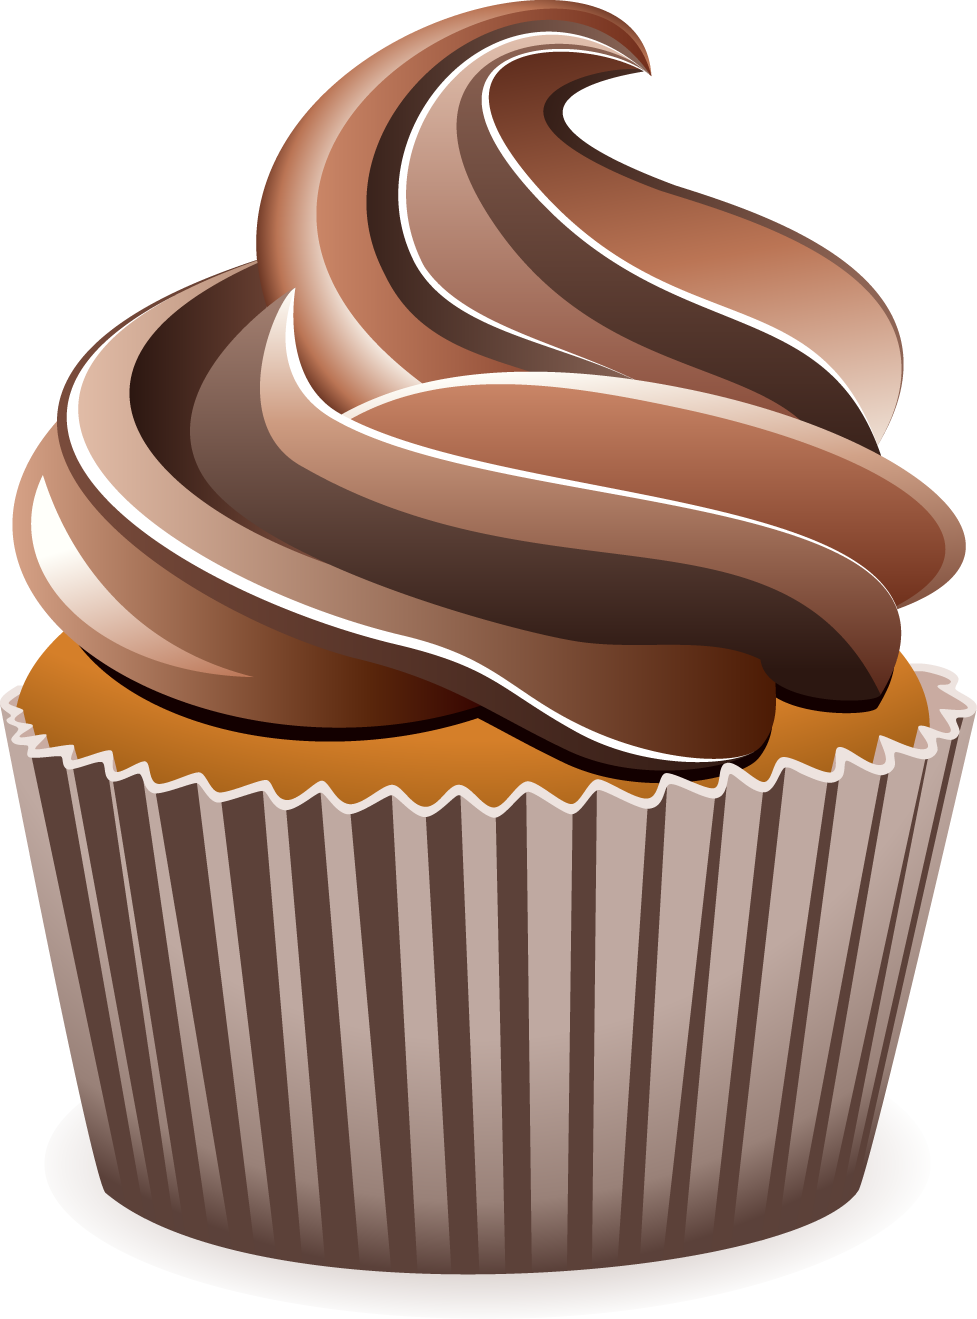 Chocolate Cupcake Png by MaddieLovesSelly